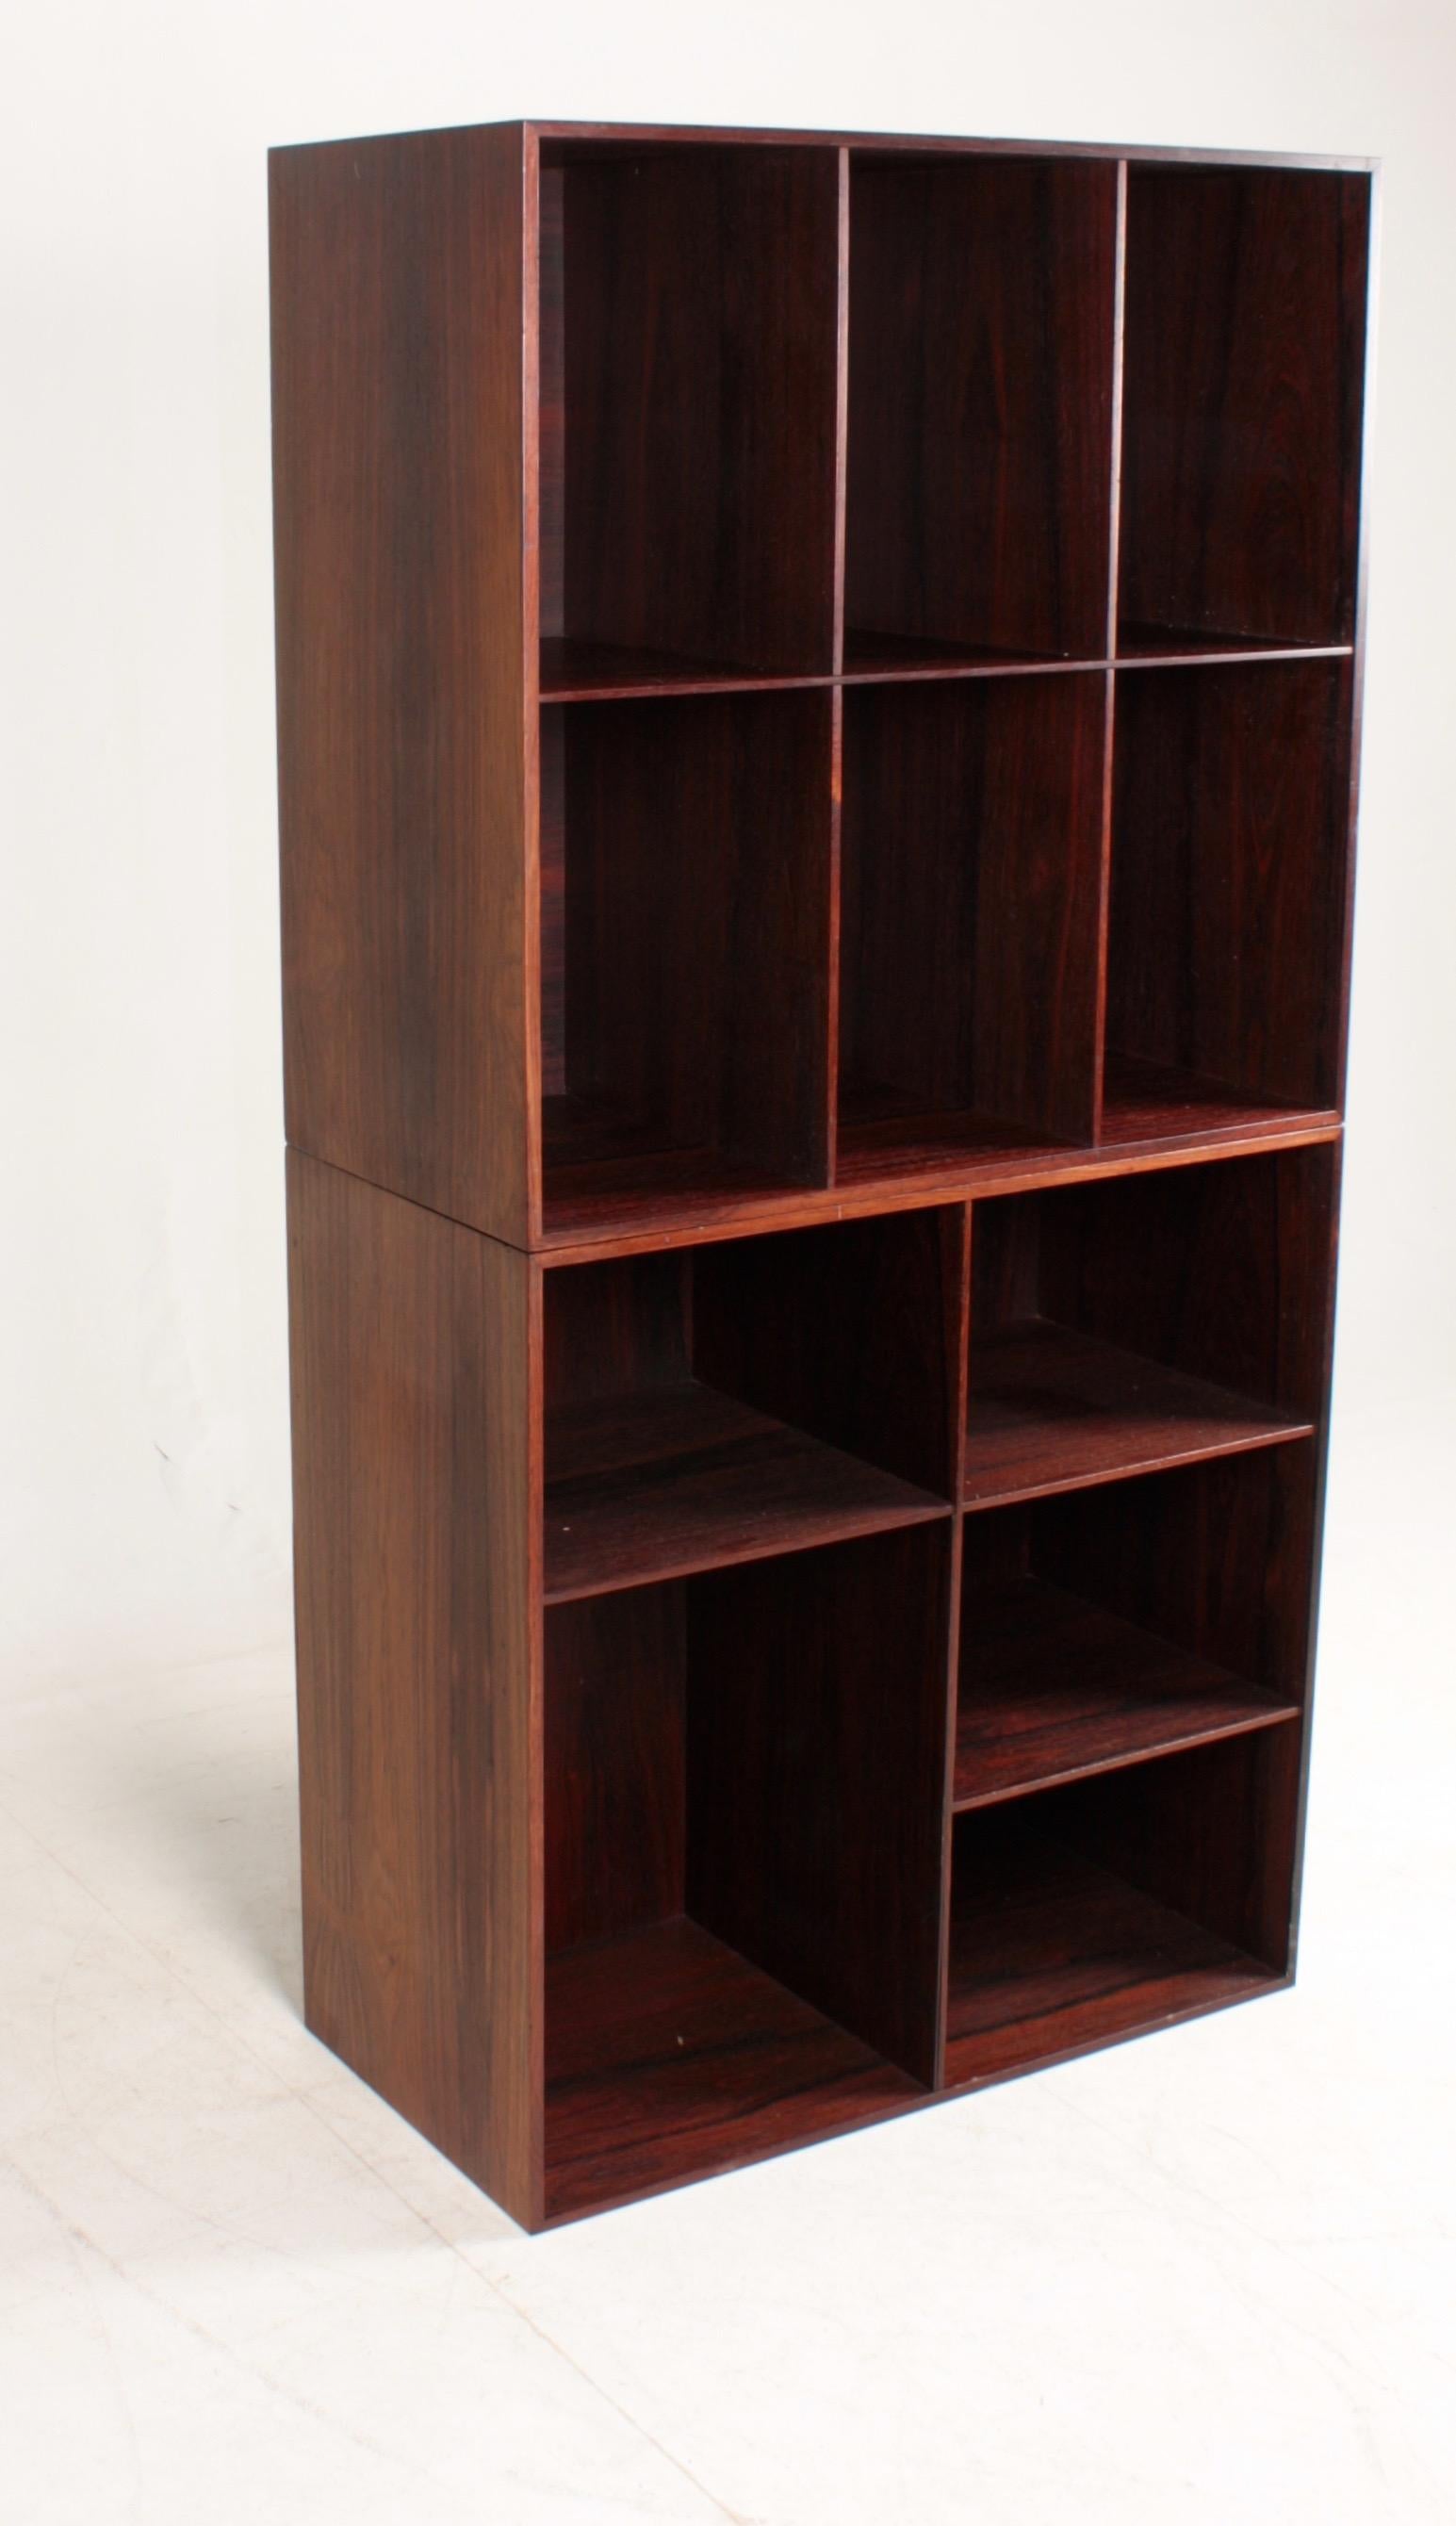 Pair of Bookcases in Rosewood by Mogens Koch, Danish Design, Mid-Century, 1950s For Sale 3